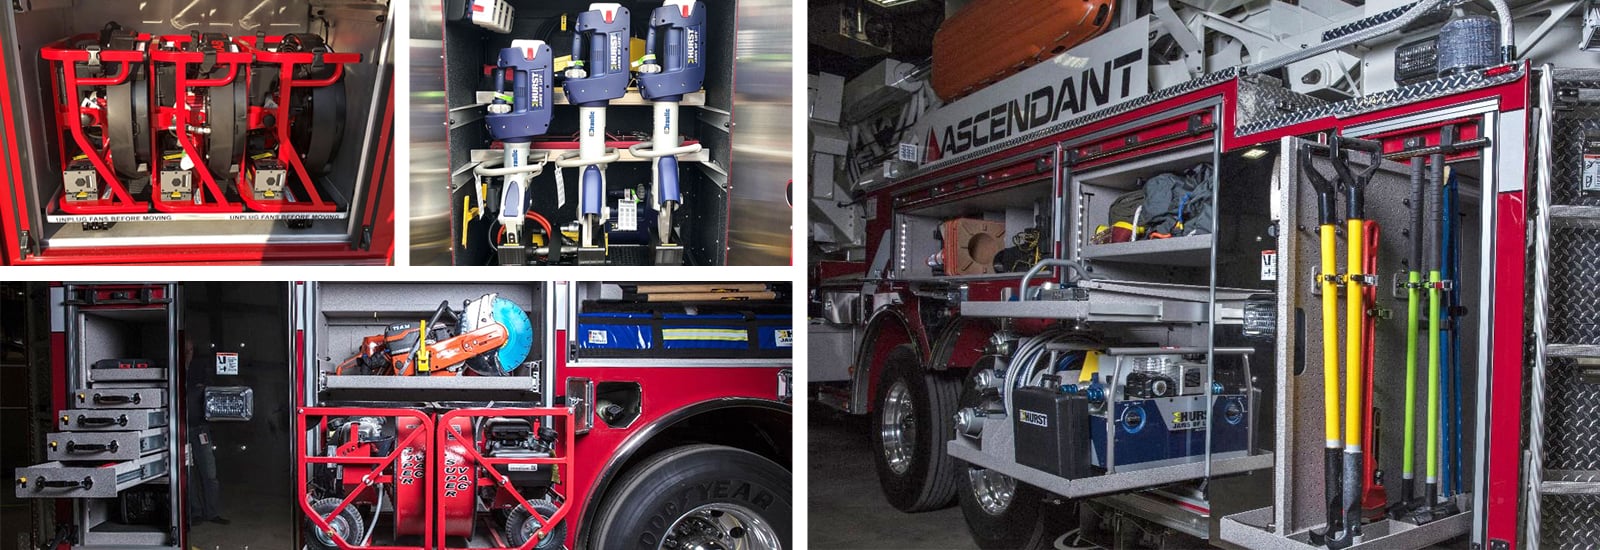 A collage of images shows how mounting brackets secure various tools on a fire truck. 